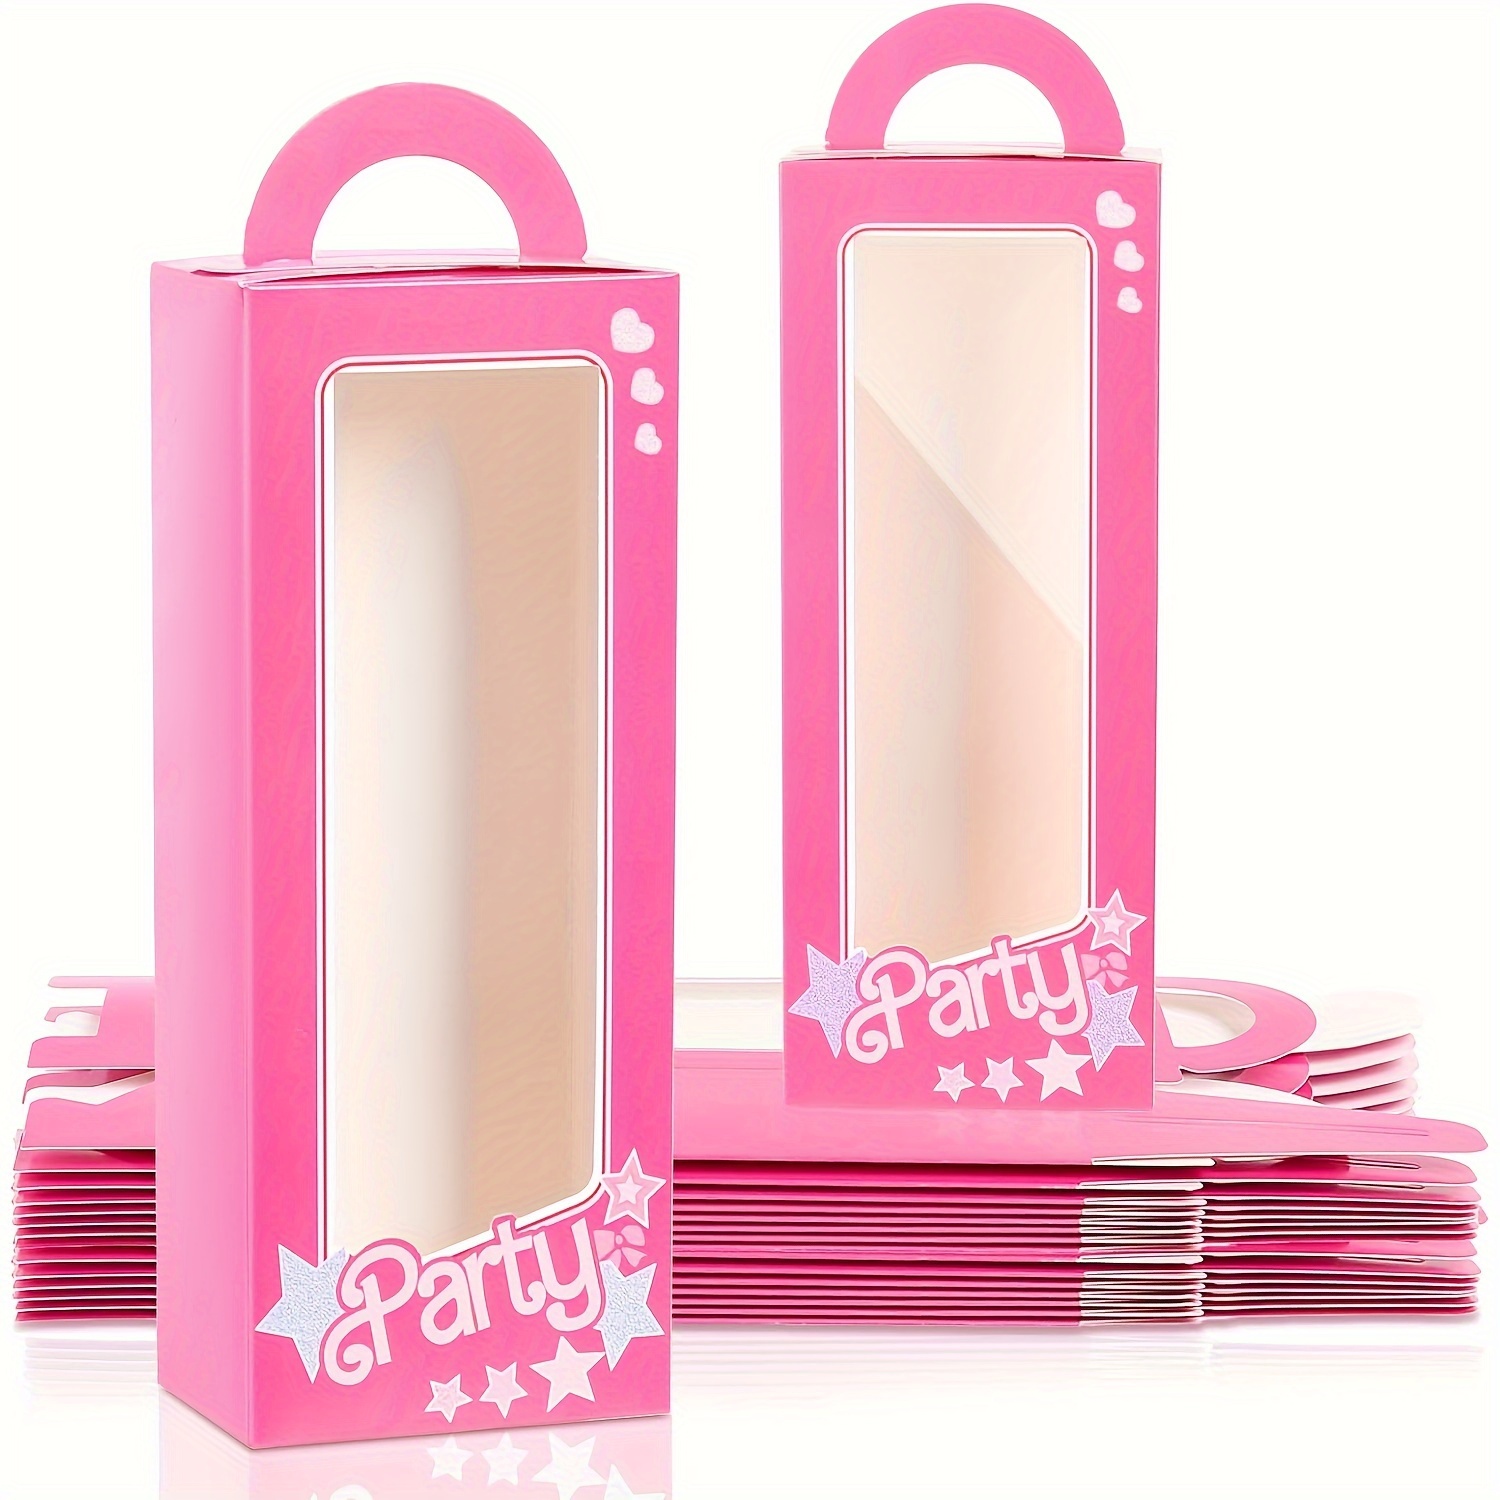 Bachelorette Party in a Box Supply Kit with Props